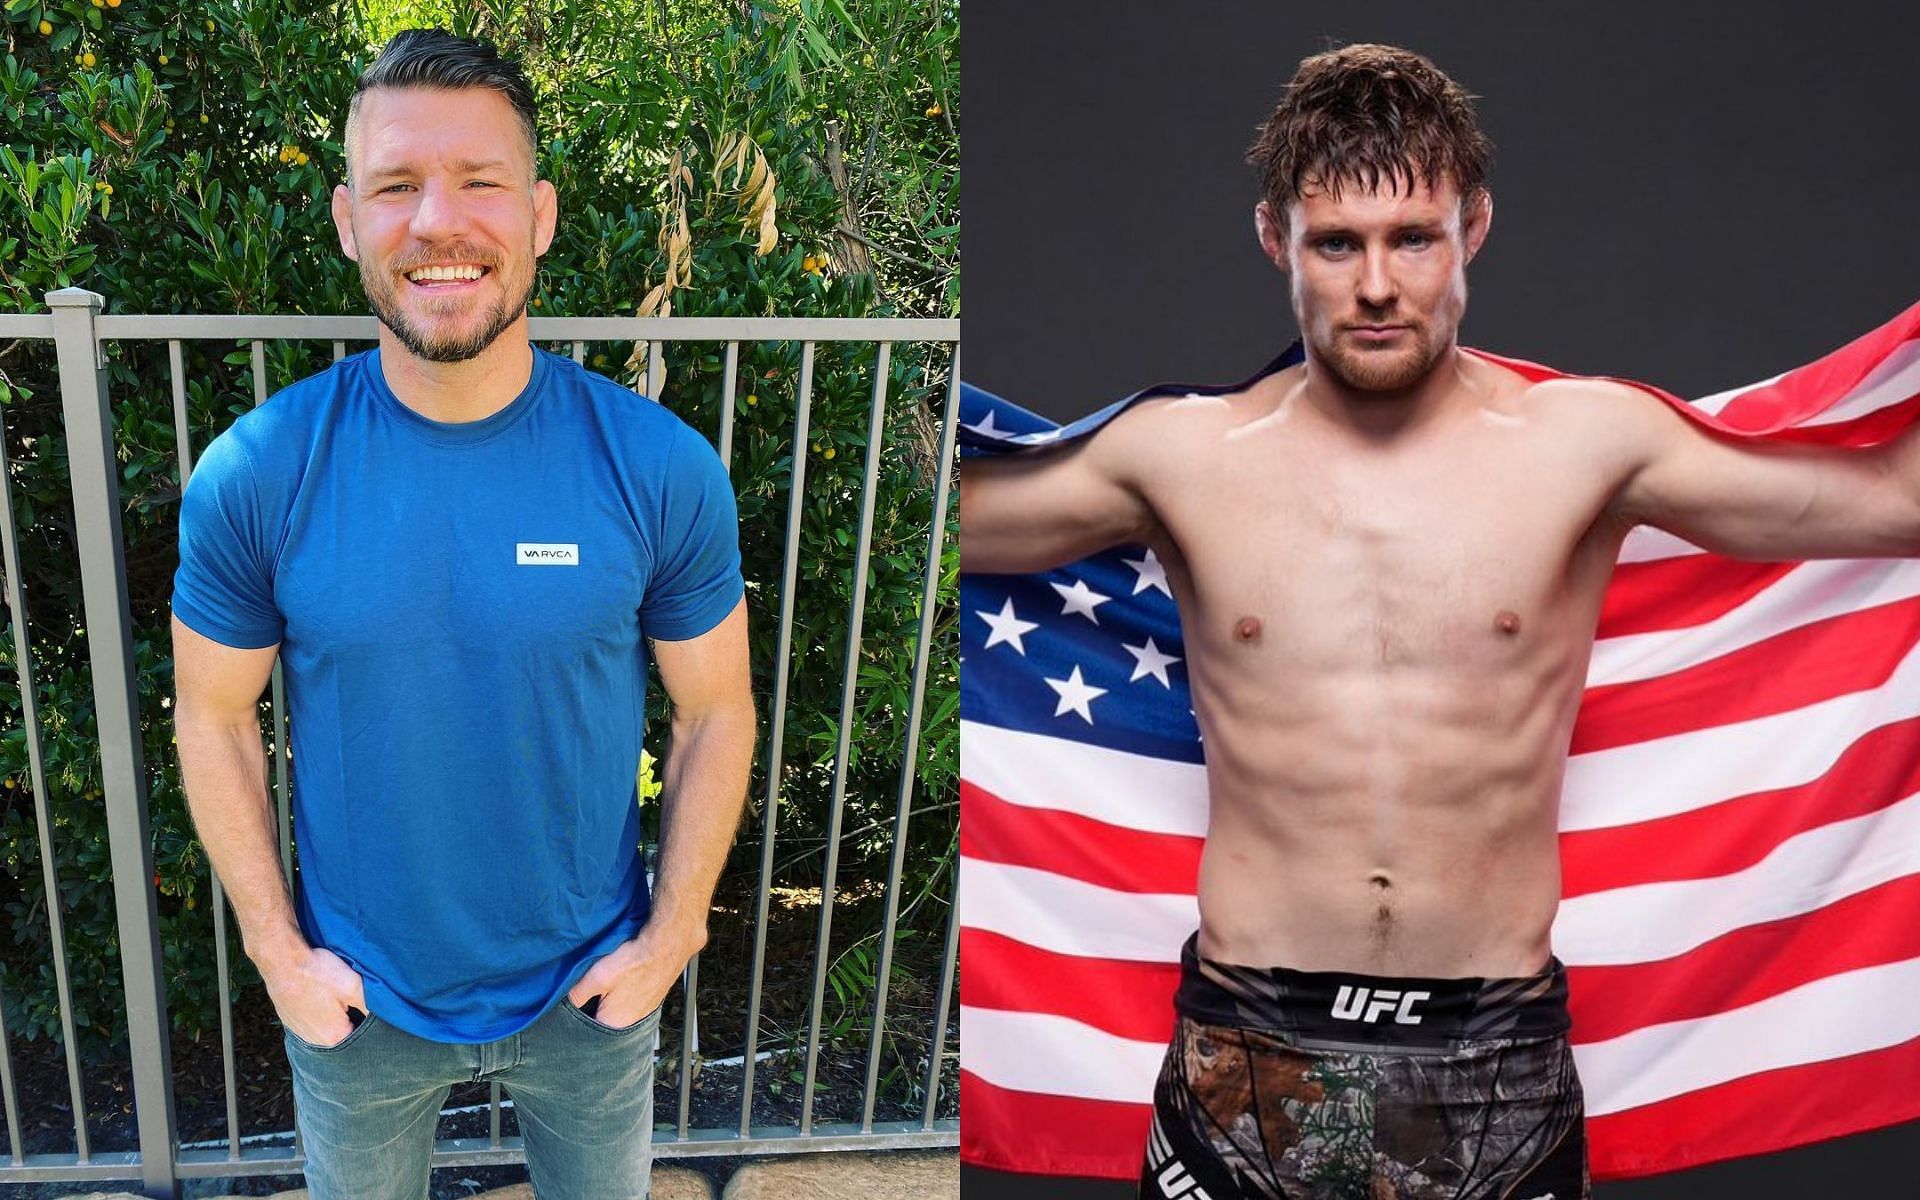 Michael Bisping (left) and Bryce Mitchell (right) [Images via @mikebisping and @thugnasty_ufc on Instagram]